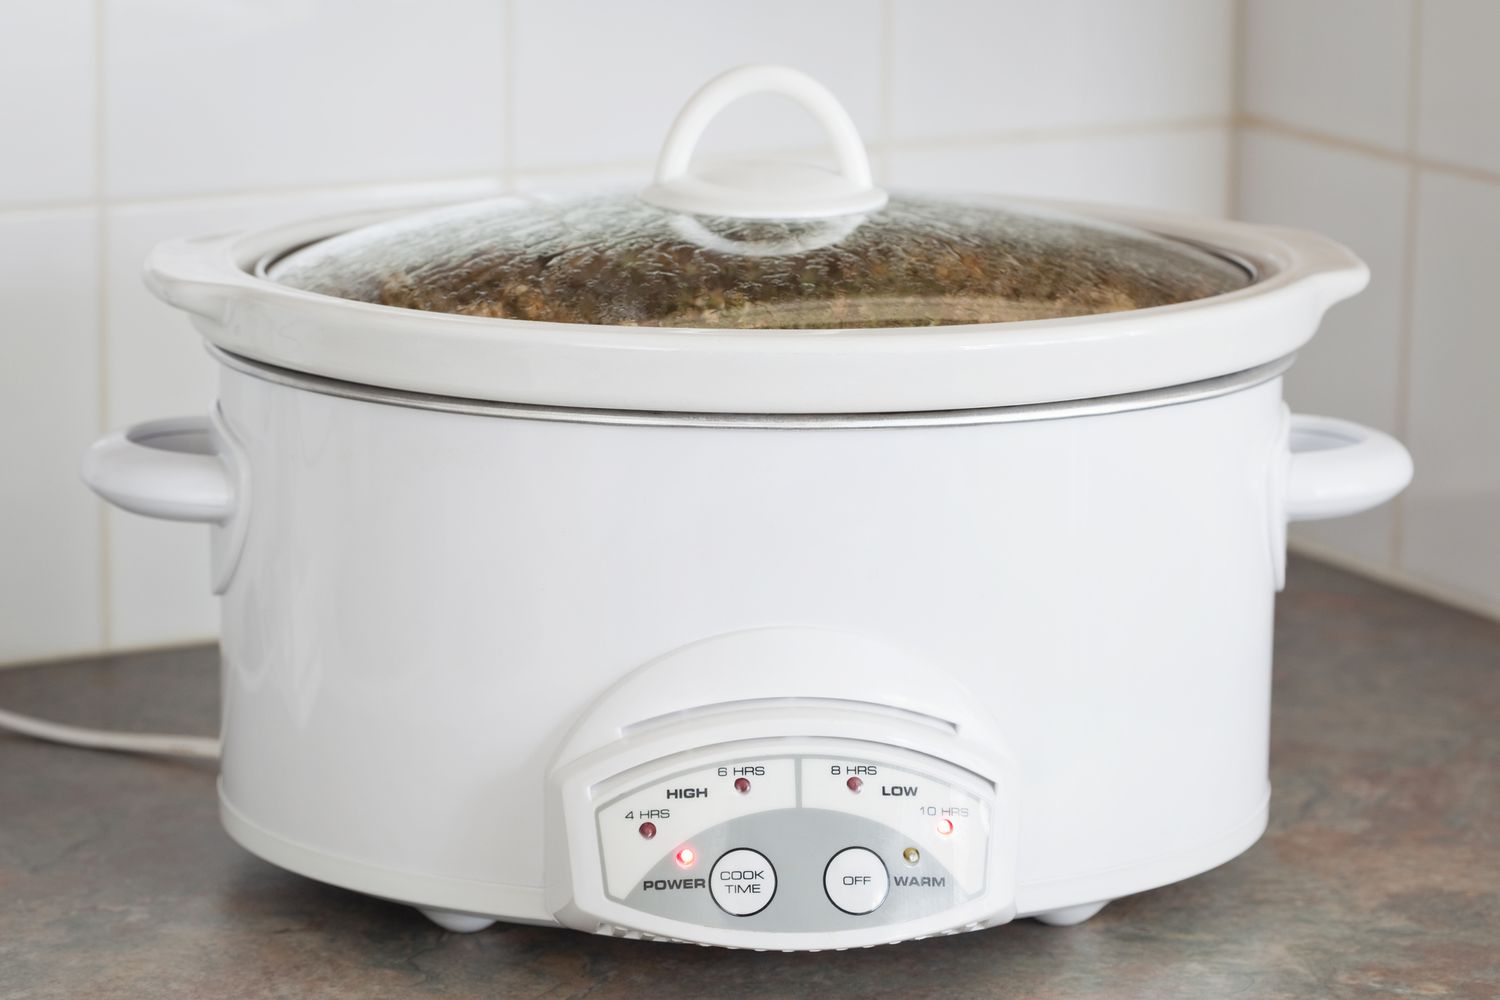 How Long To Cook Steak In Slow Cooker